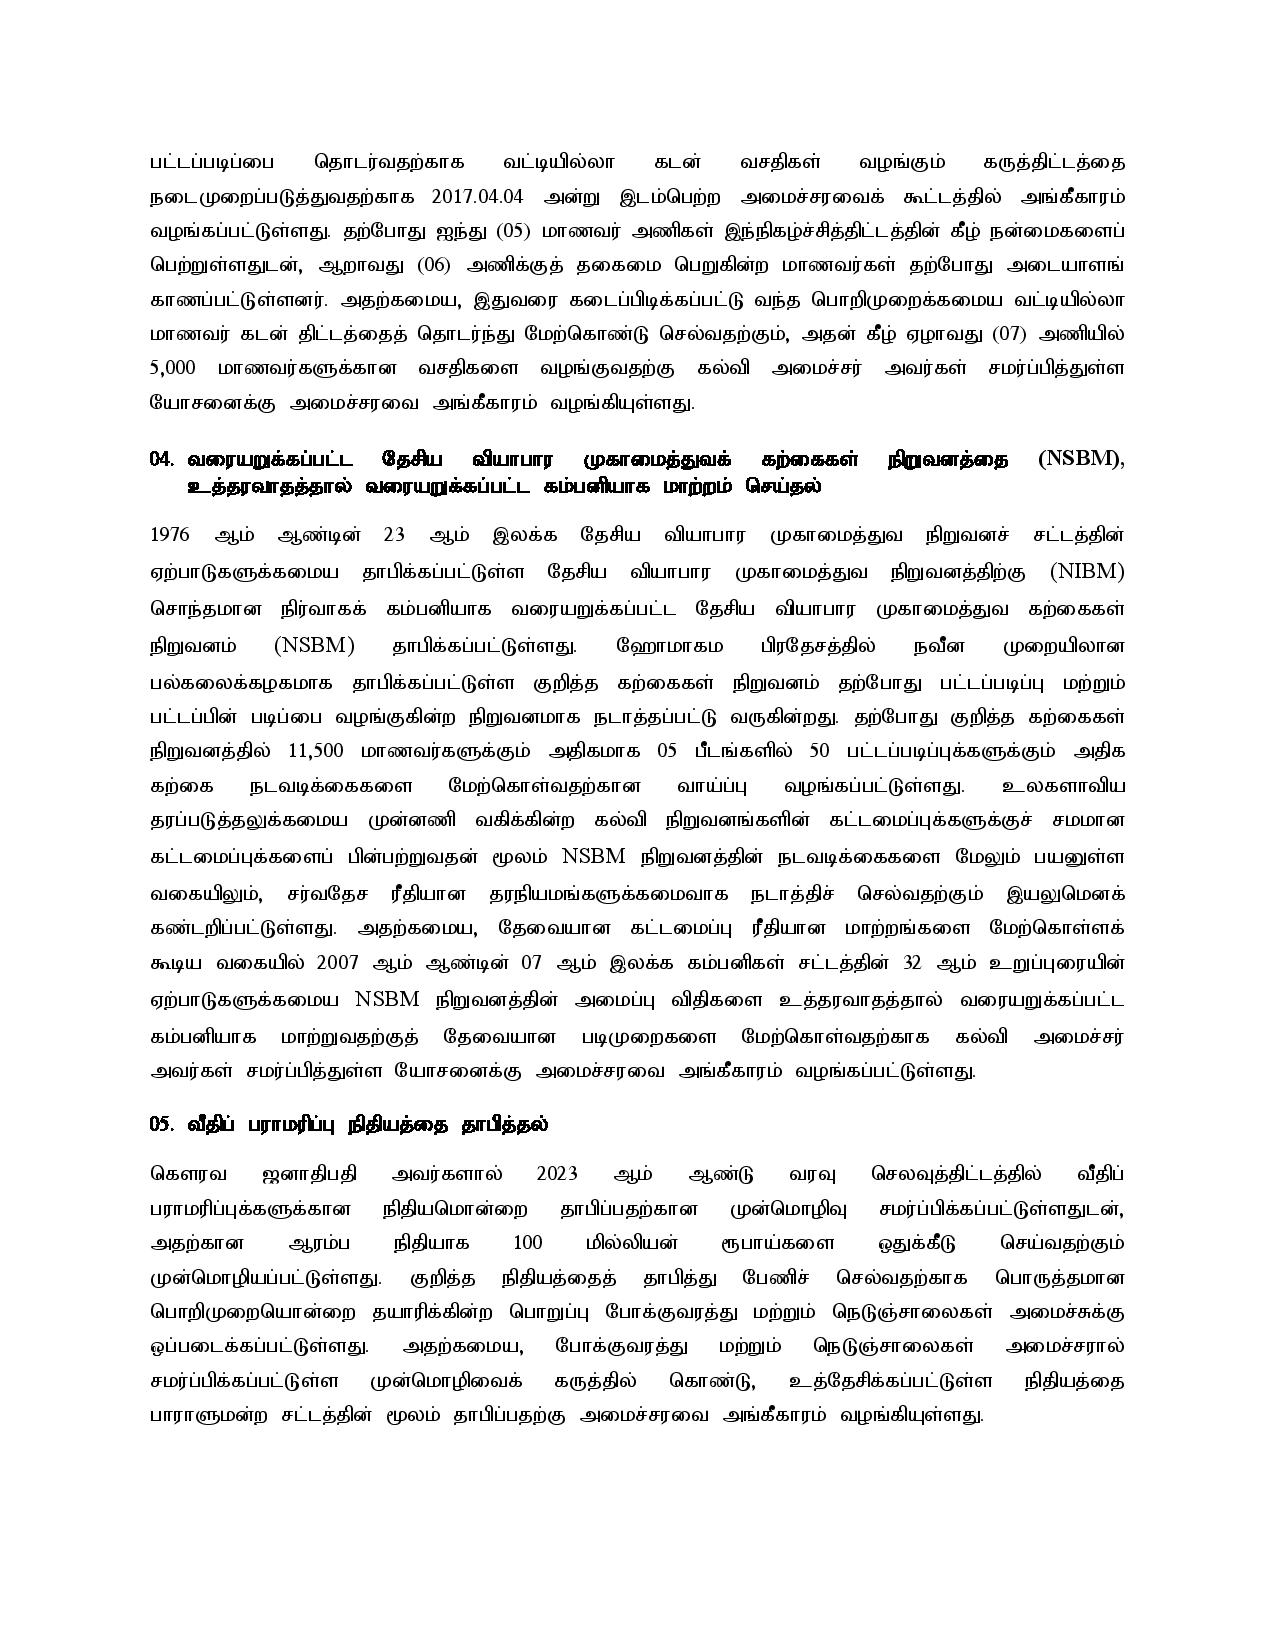 Cabinet Decisions on 27.03.2023 Tamil page 002